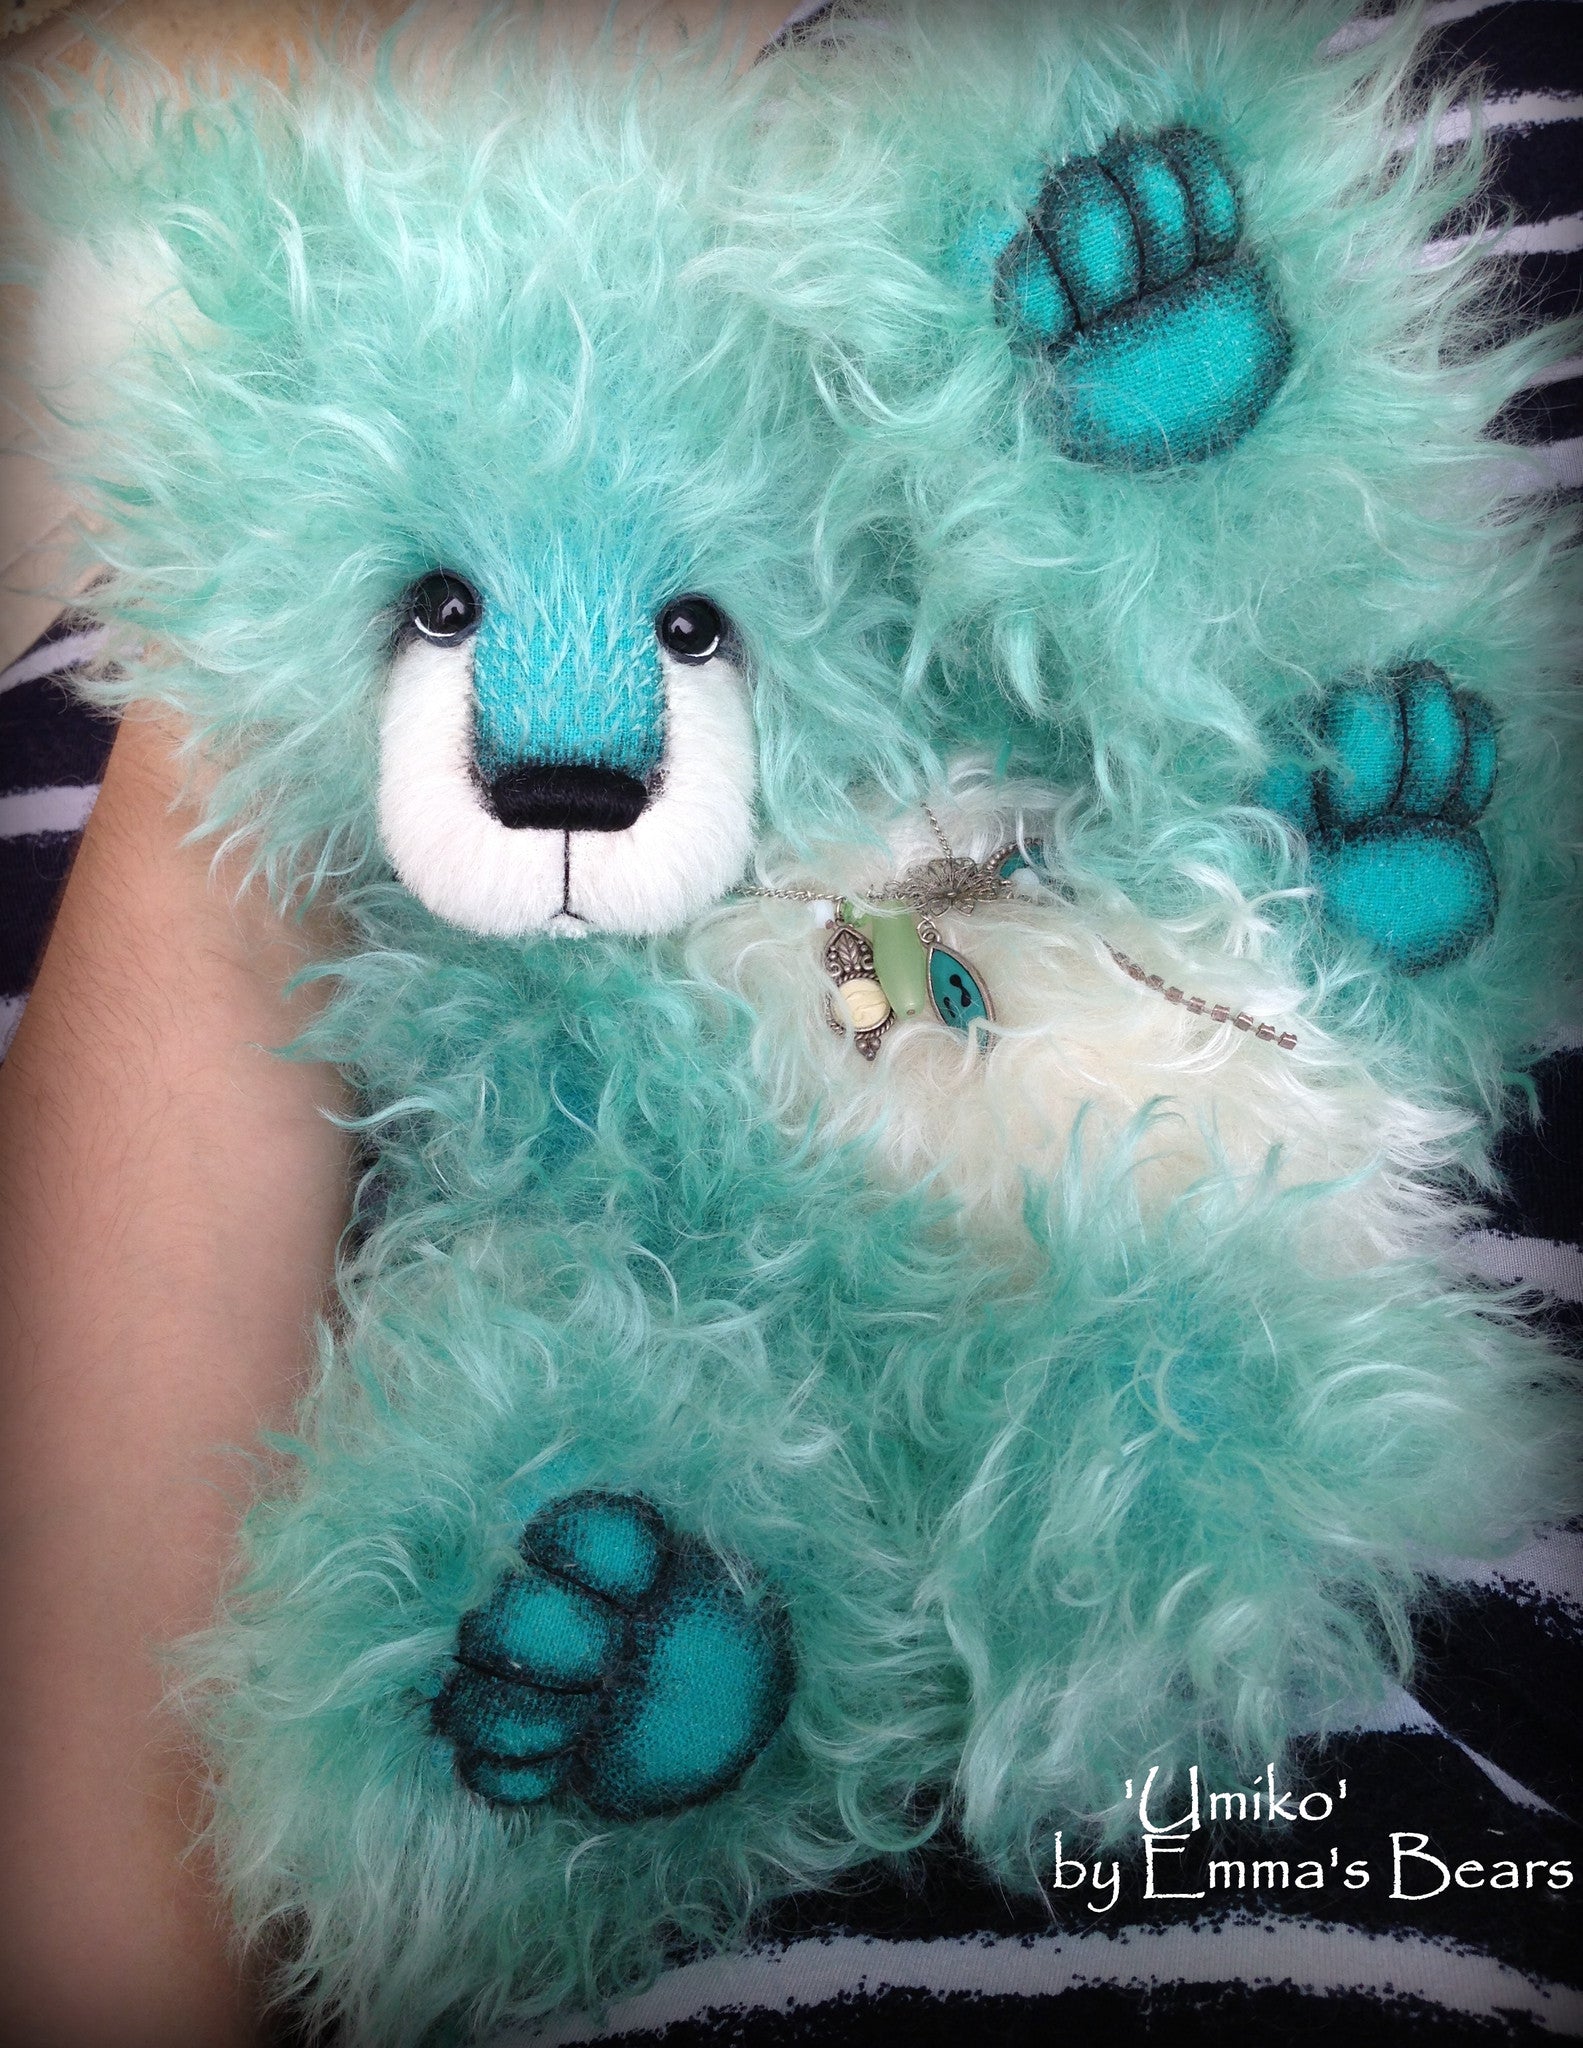 Umiko - 17IN hand dyed turquoise mohair bear by Emmas Bears - OOAK